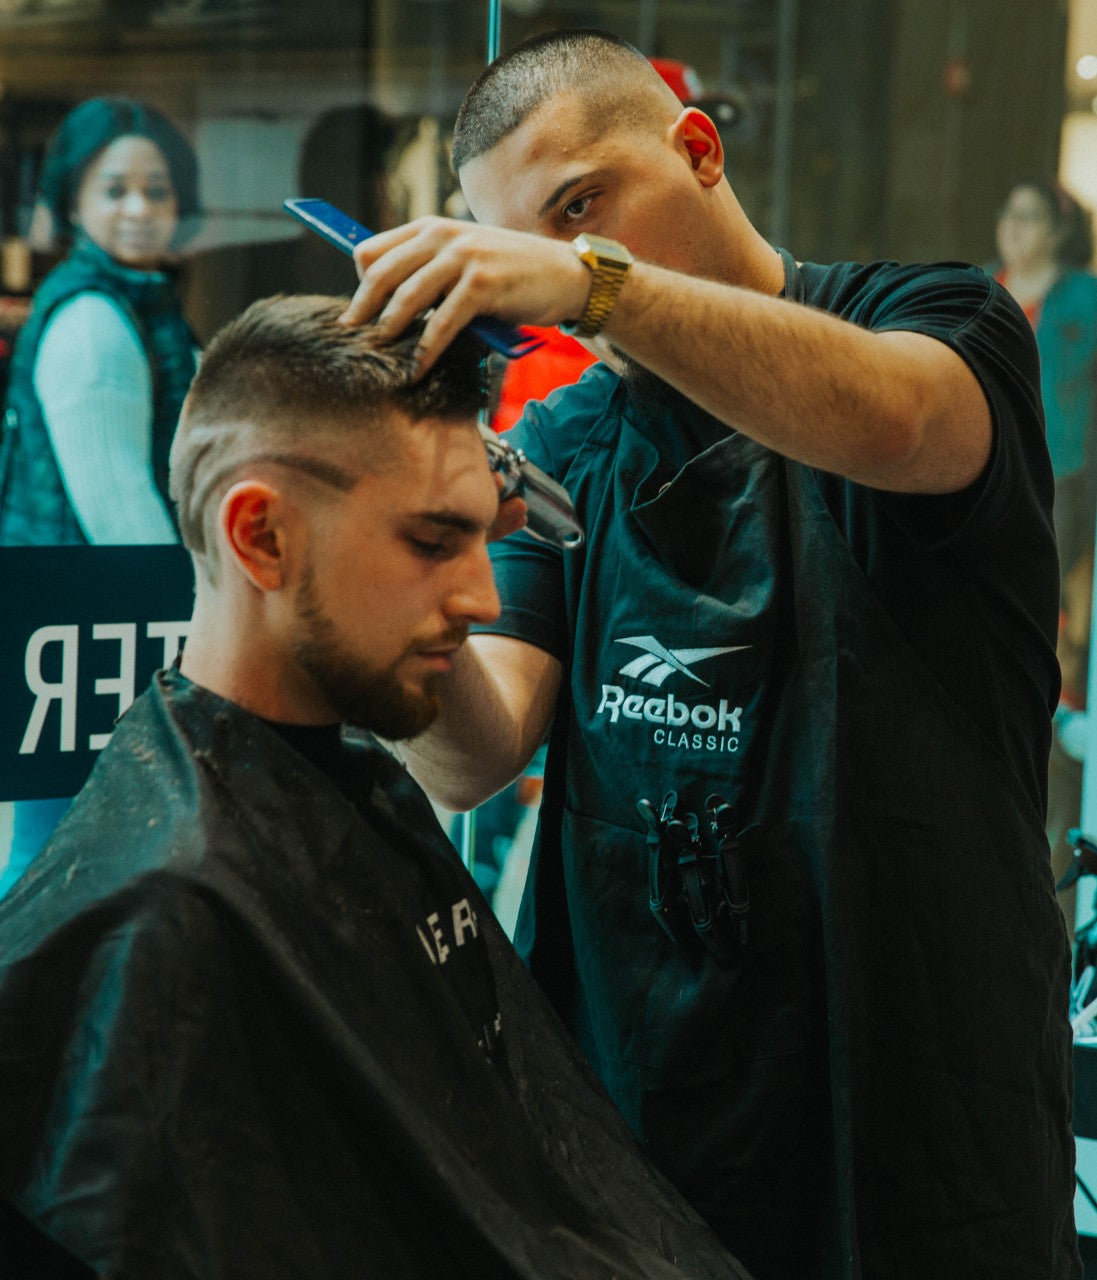 Reebok and Footaction host battle of the barbers, Fade Room represents Toronto's west end neighbourhood